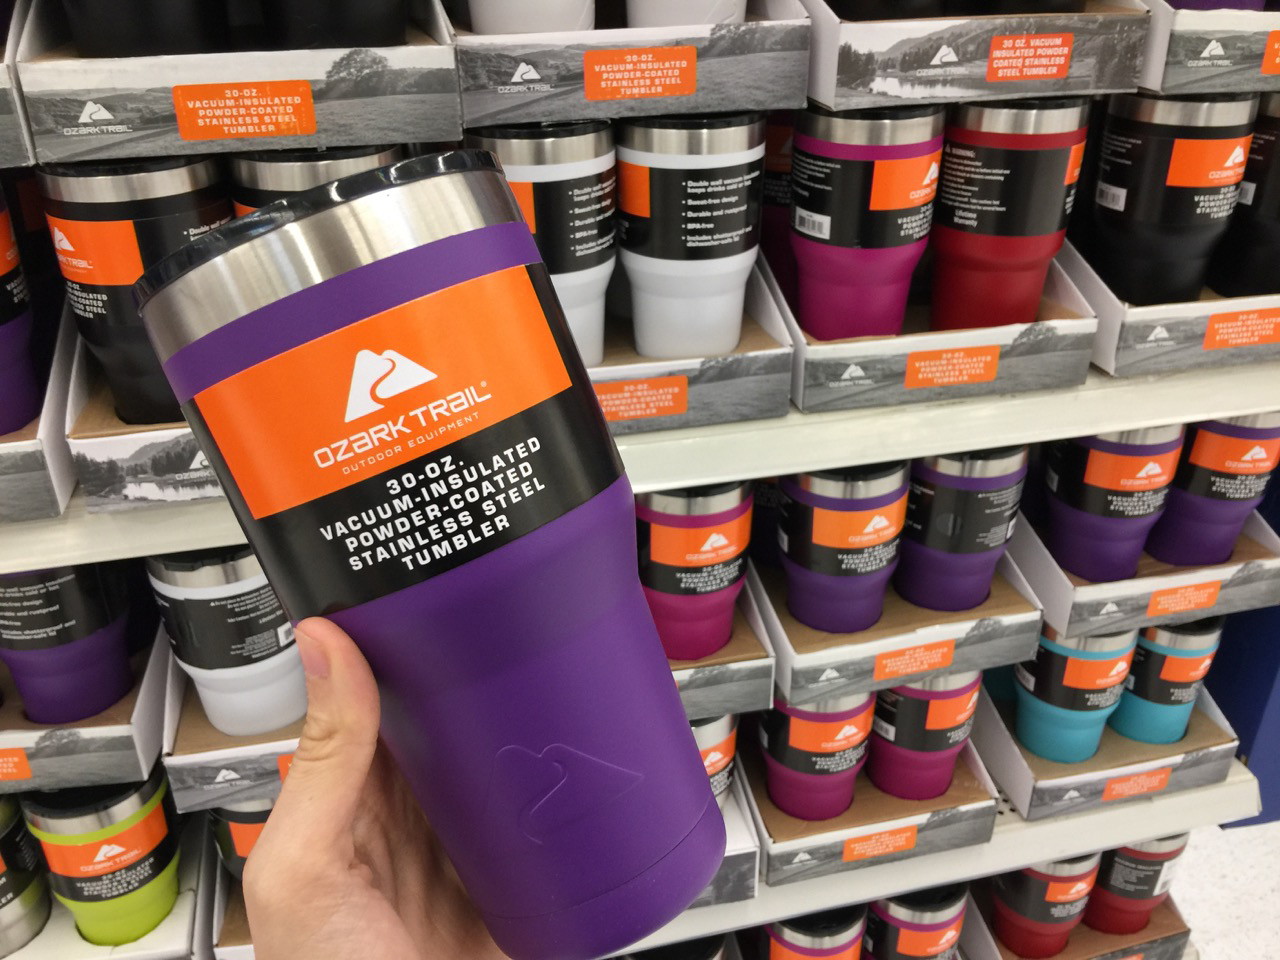 tumblers only Trail Ozark Ounce at $9.74 Tumblers, 30 Only Walmart!